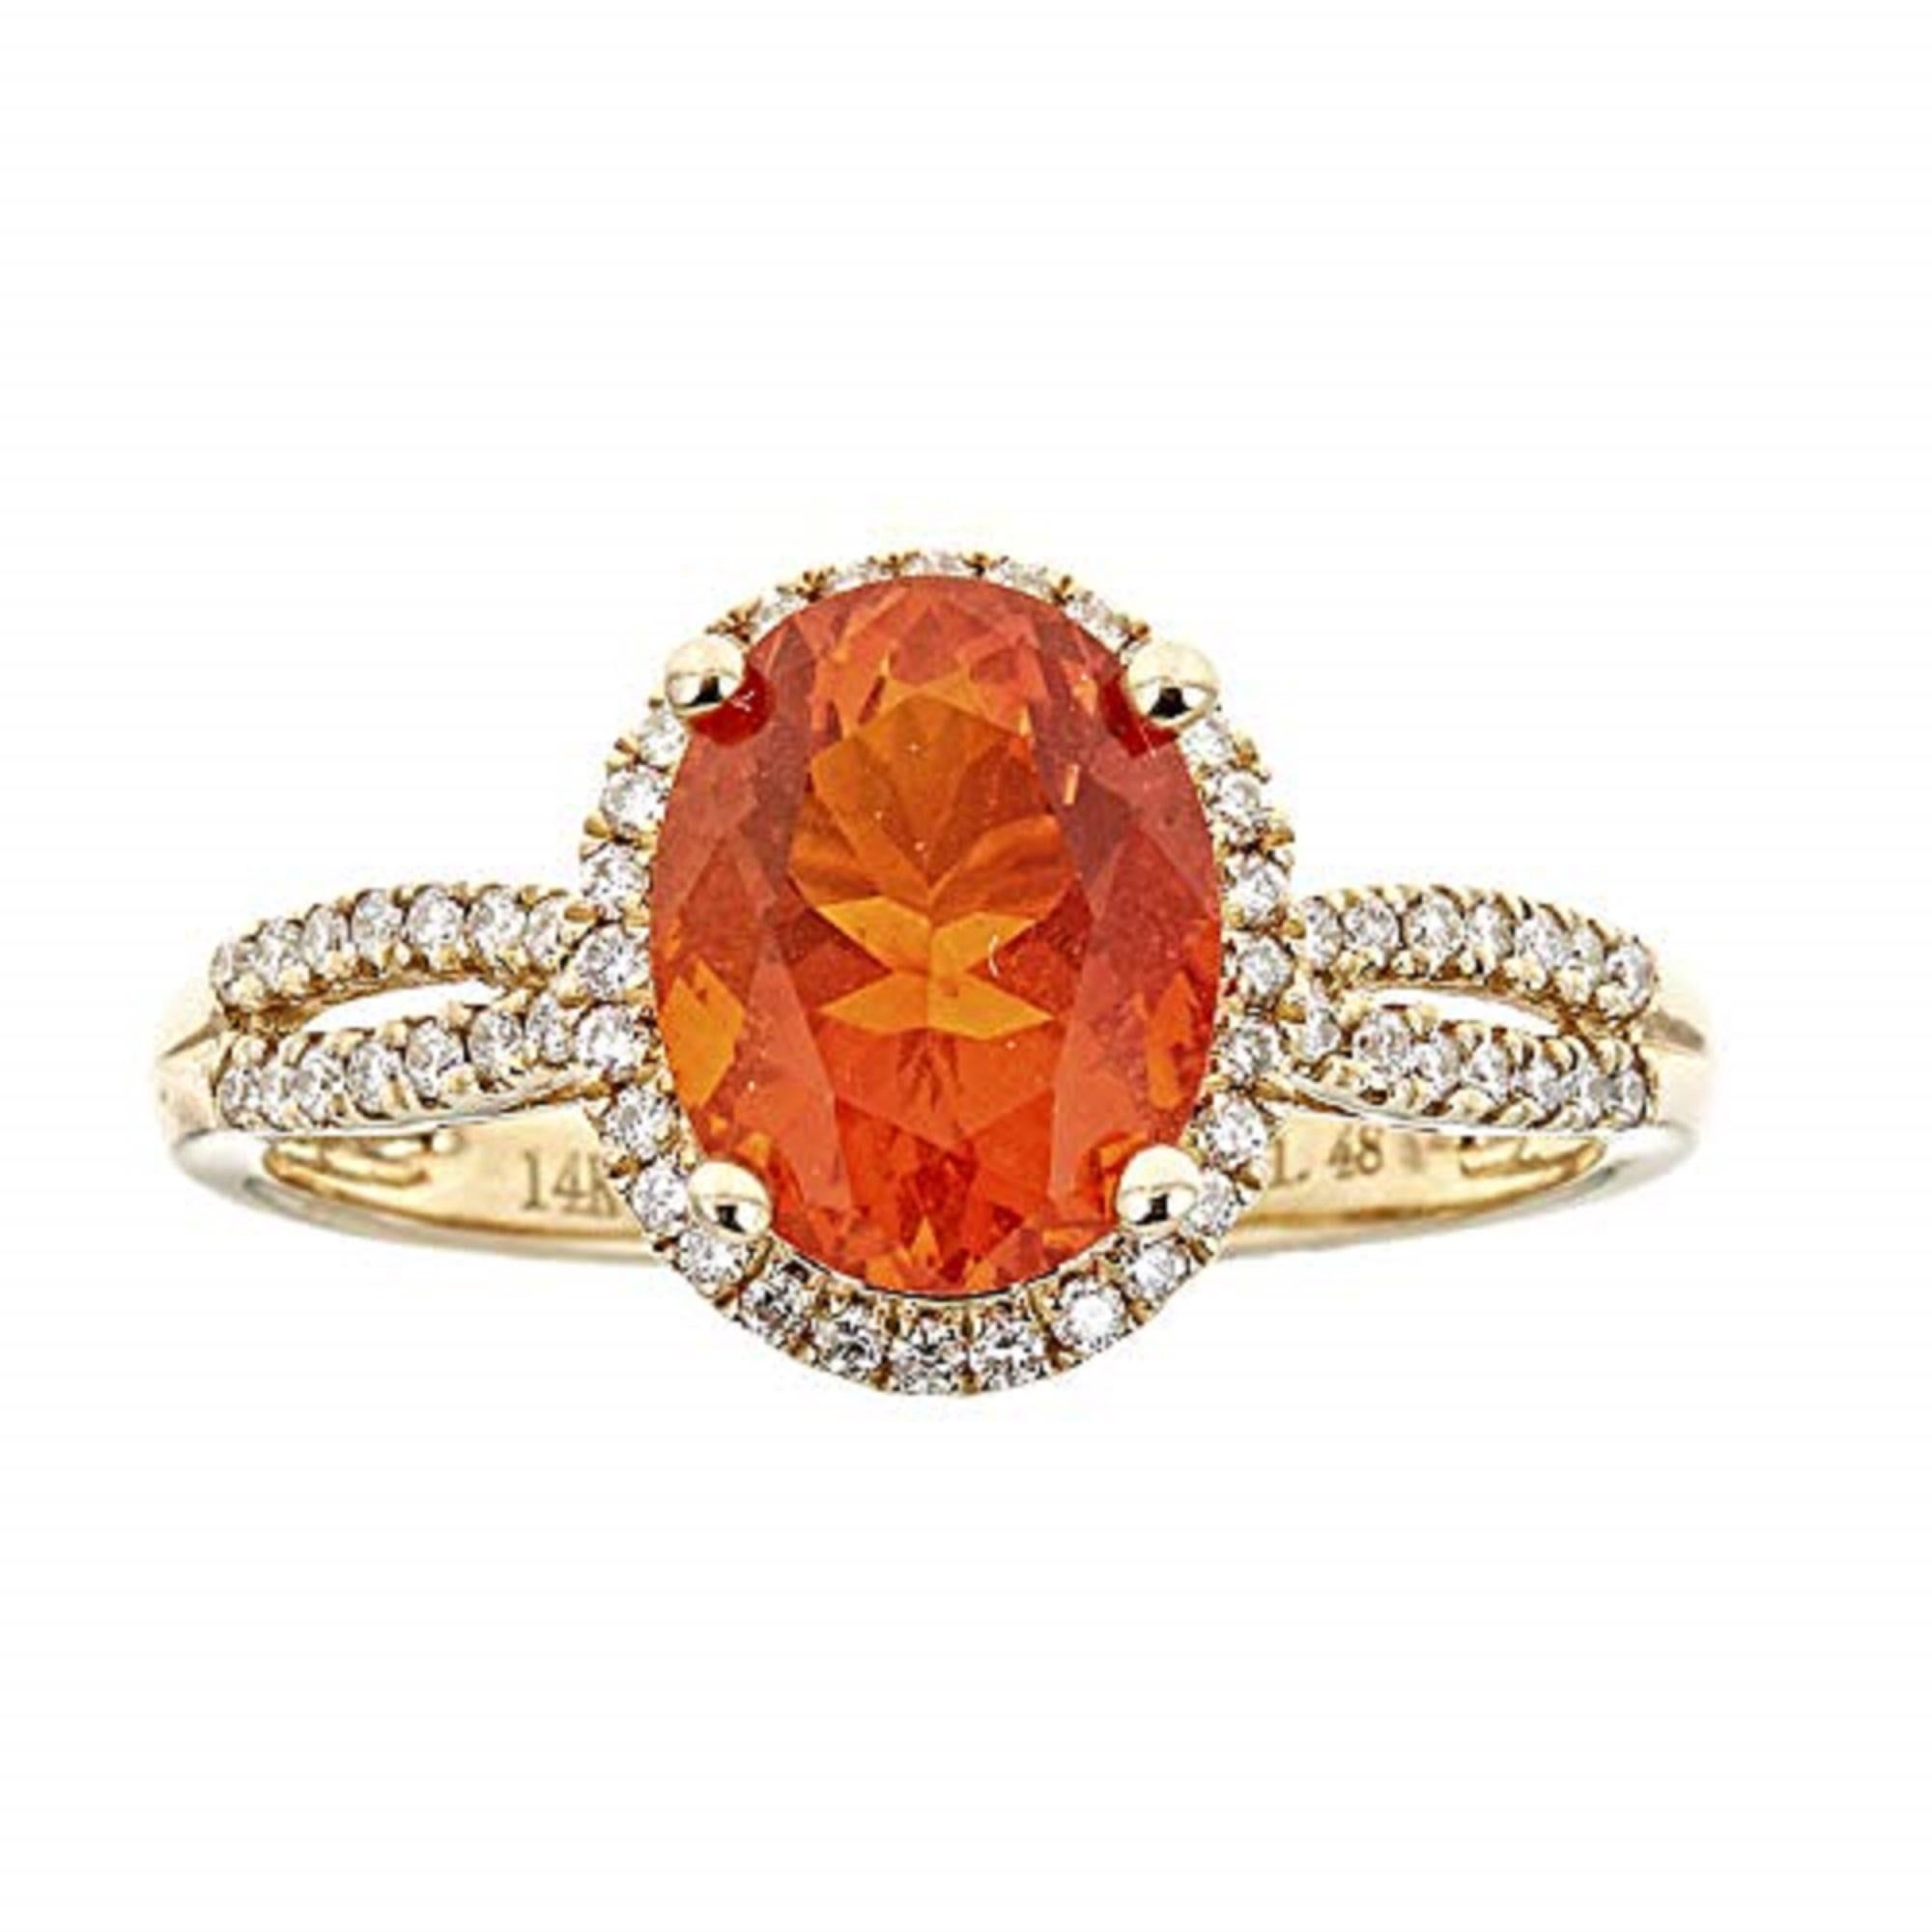 Art Deco Gin and Grace 14K Yellow Gold Maxican Fire Opal Ring with Diamonds for women